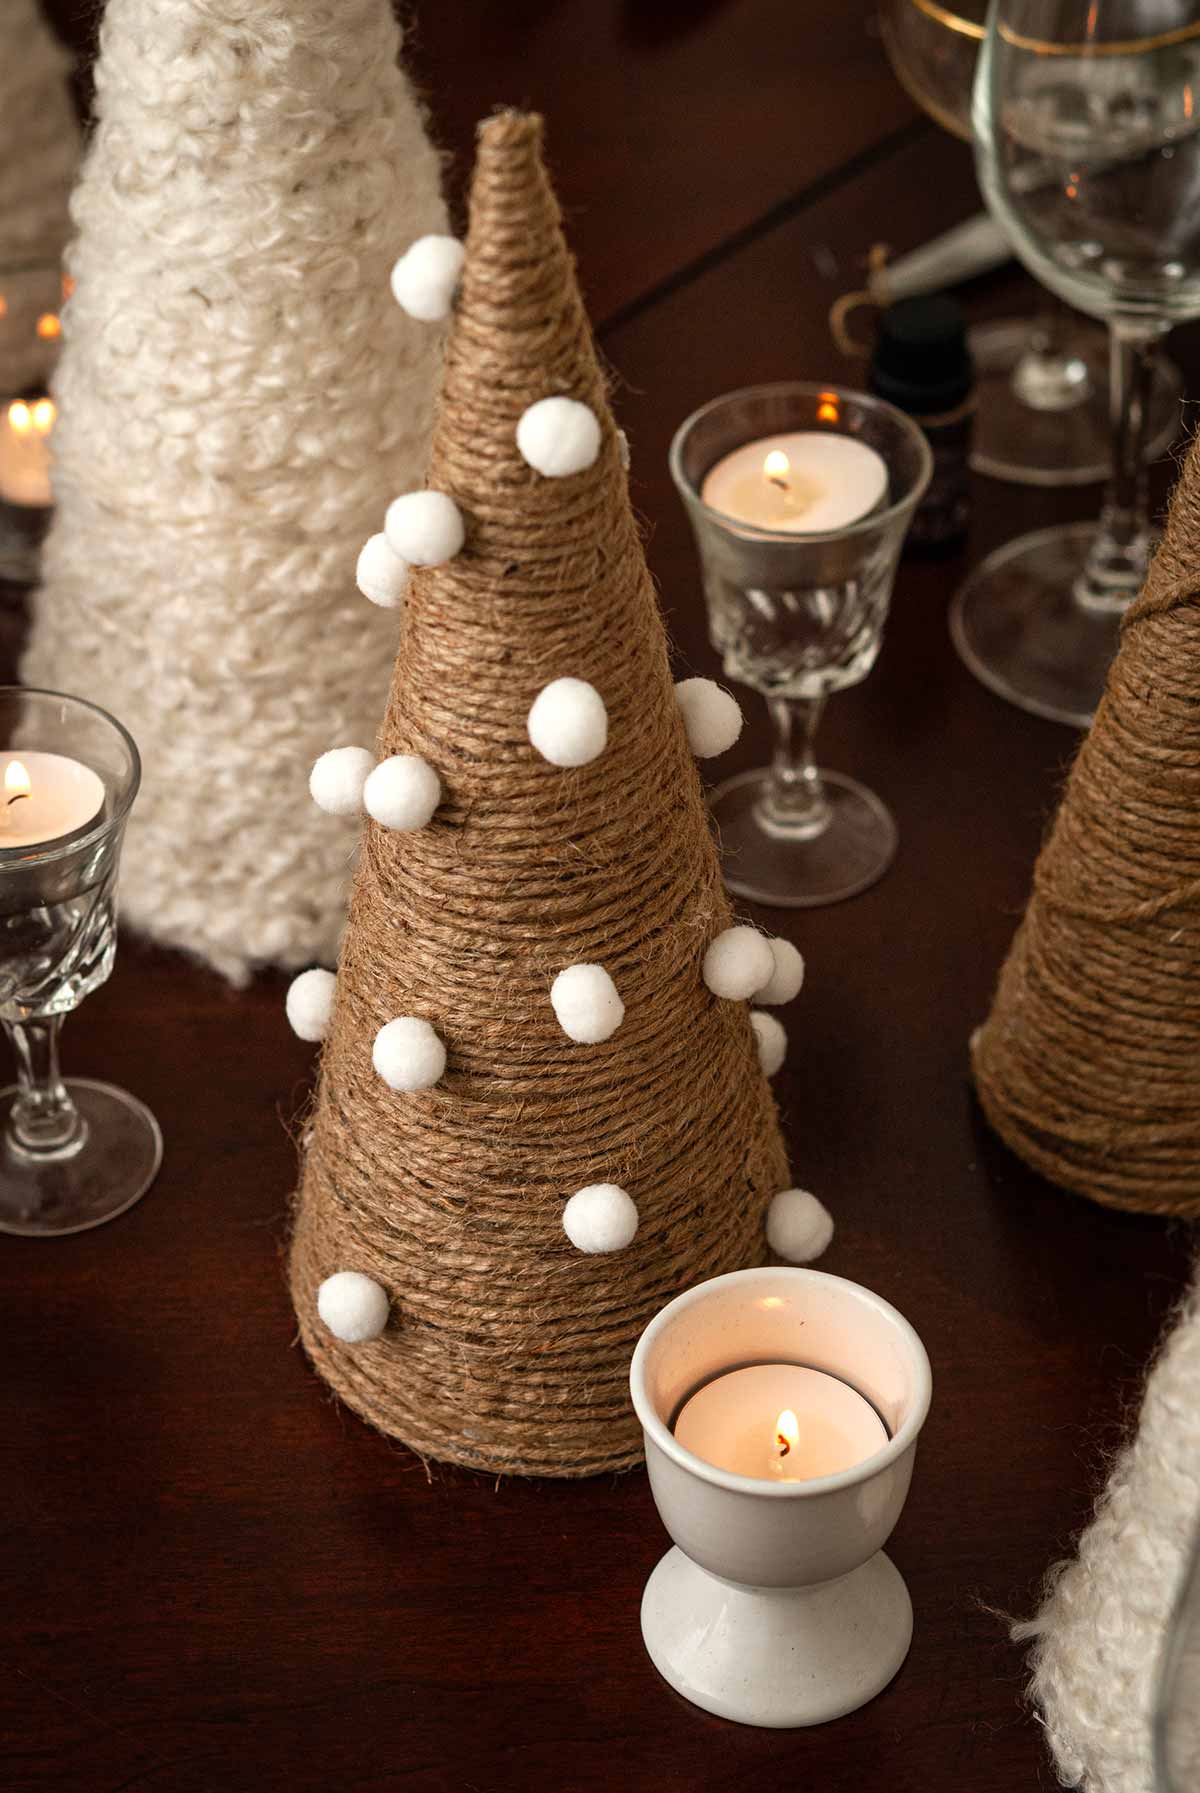 A twine tree with tiny pompom balls next to an egg cup tea light on a table.